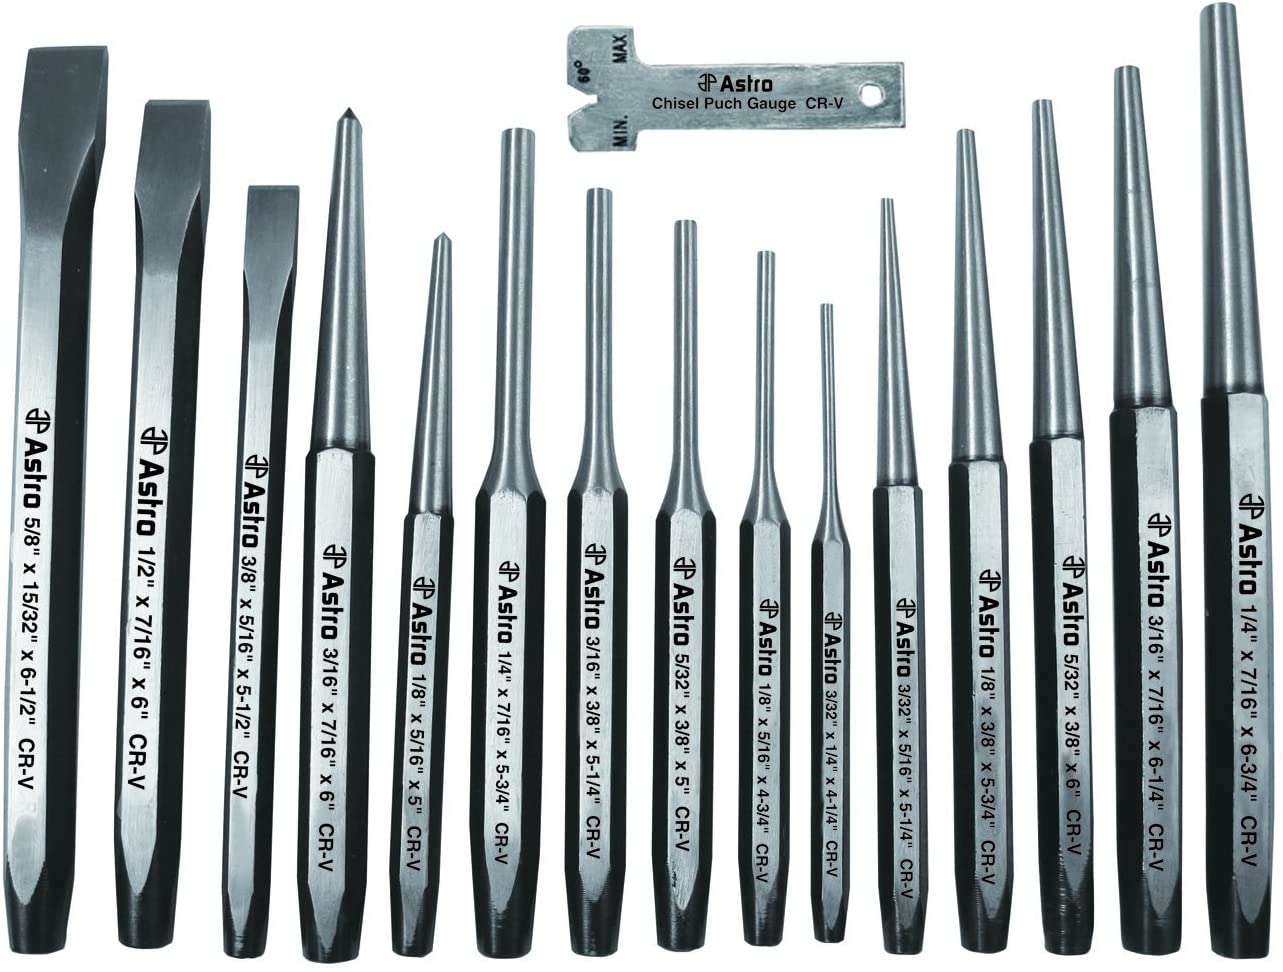 Astro Pneumatic 1600 16-Piece Punch and Chisel Set - MPR Tools & Equipment